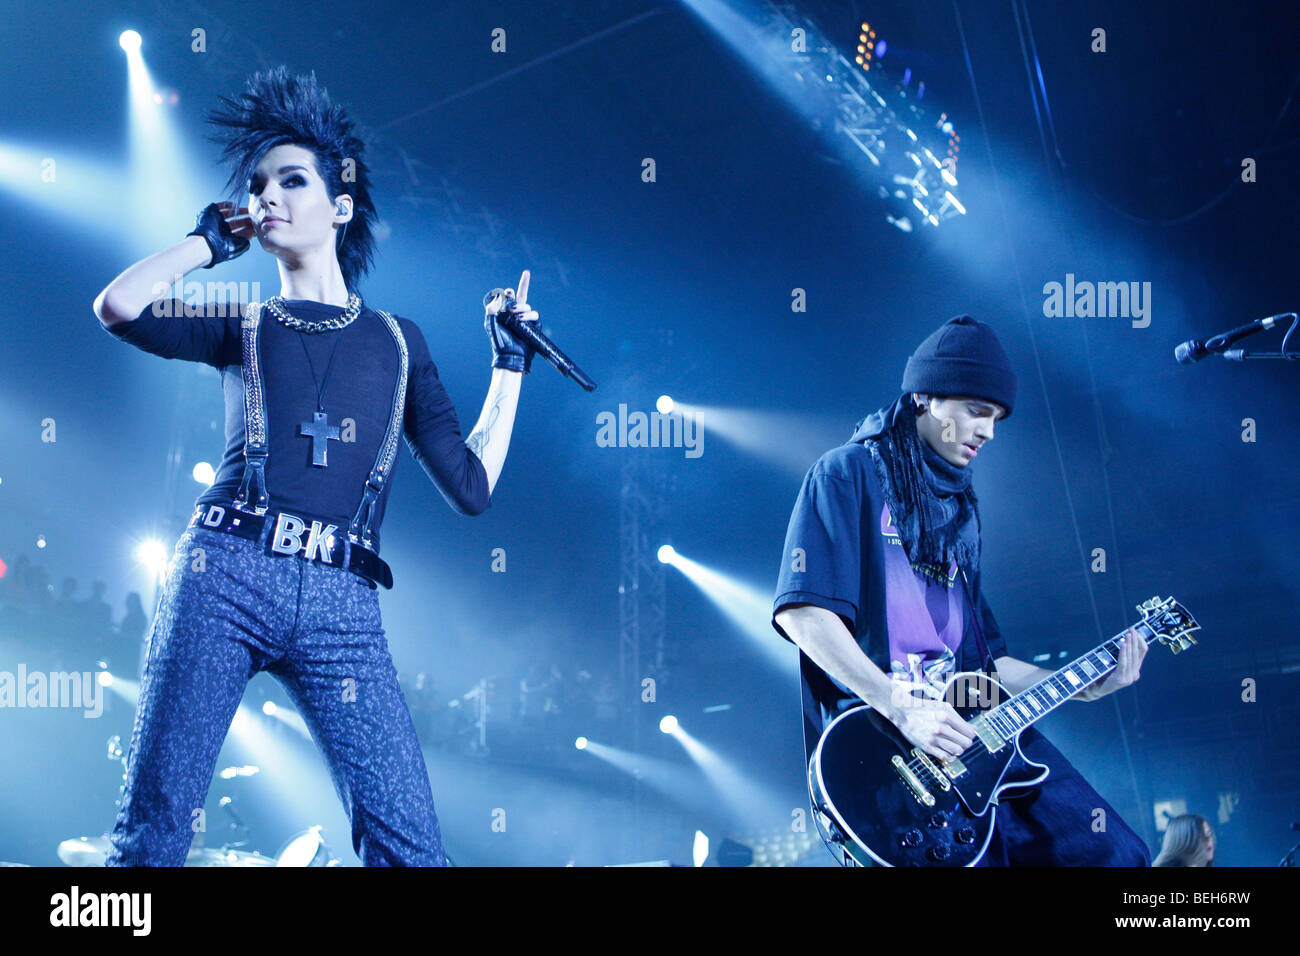 9 Oct 2009 Athens Greece. MTV day with the German band Tokio Hotel. Stock Photo